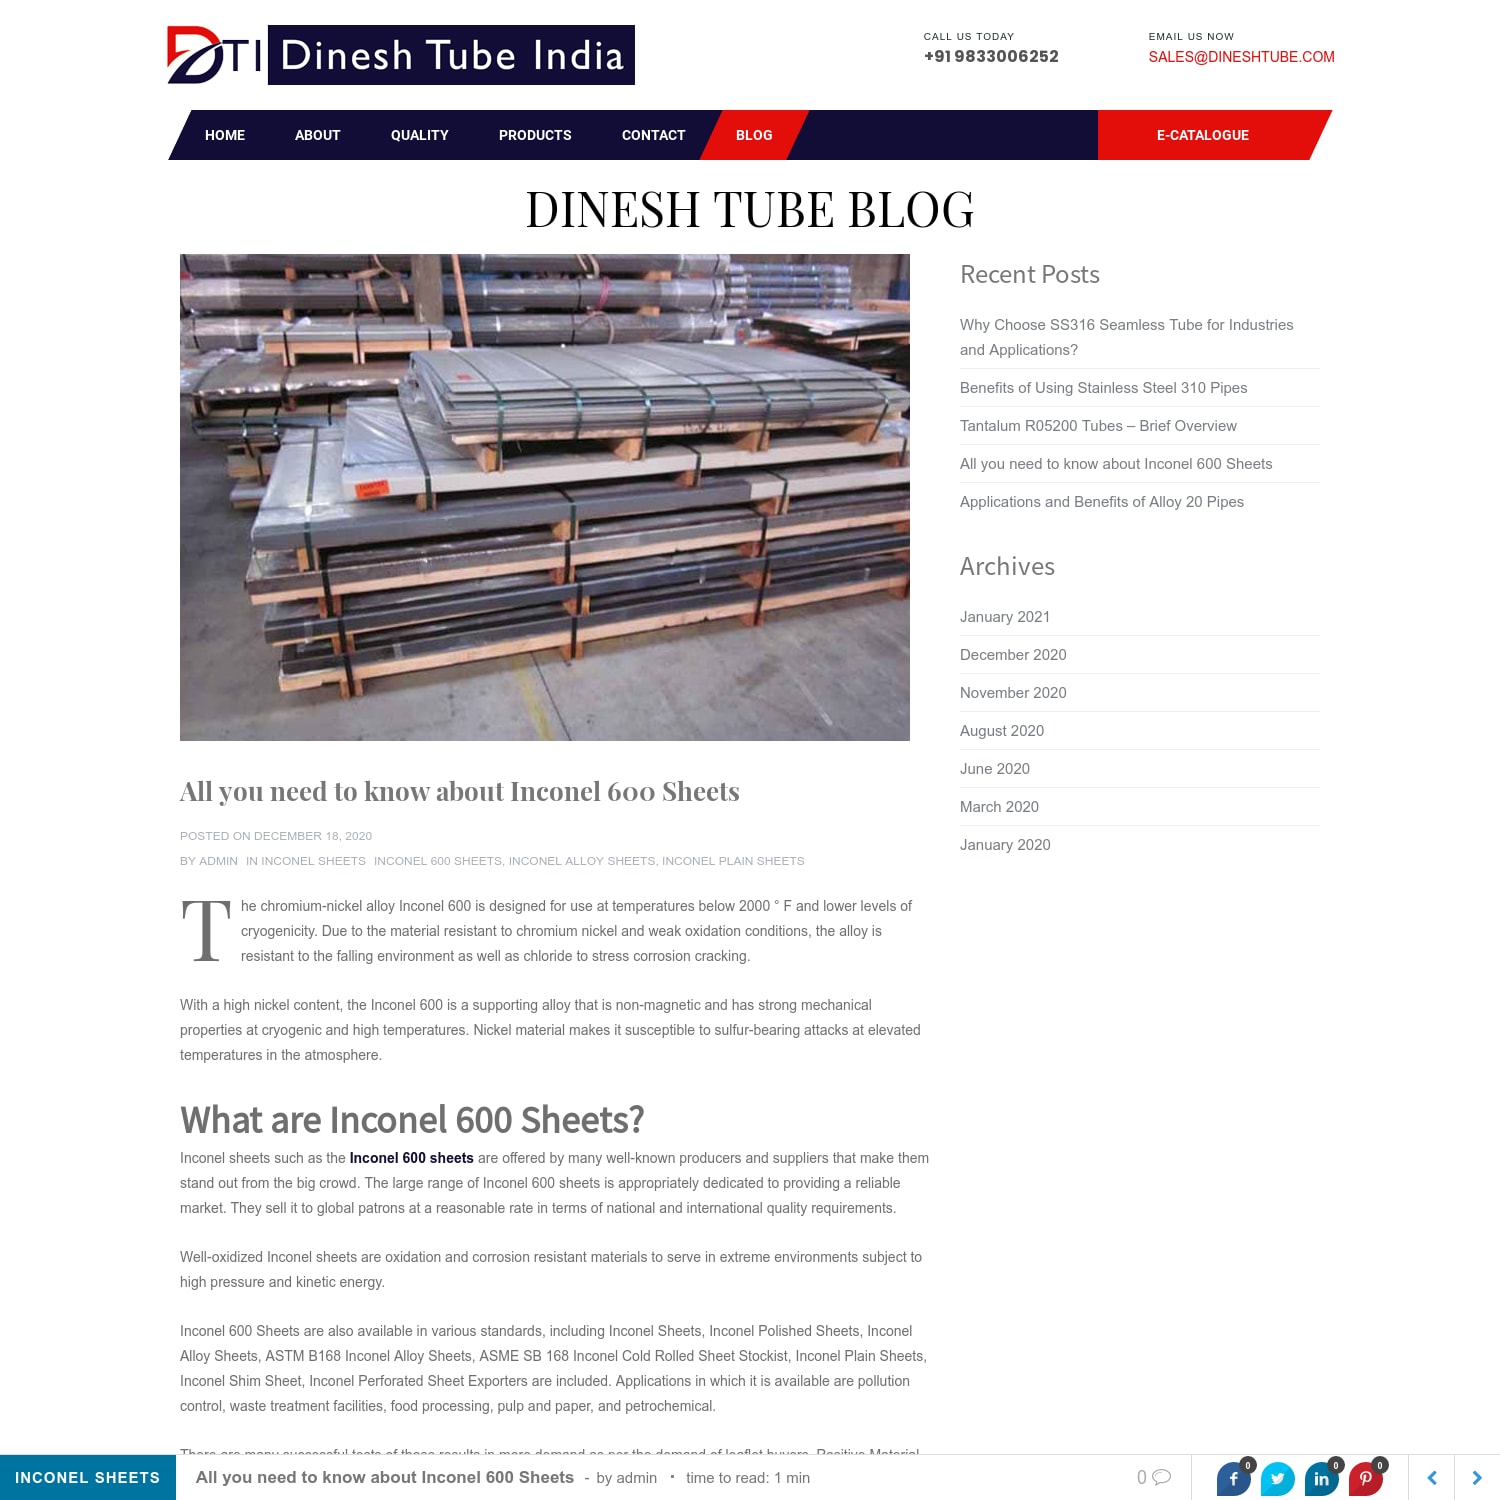 All you need to know about Inconel 600 Sheets - Dinesh Tube Blog